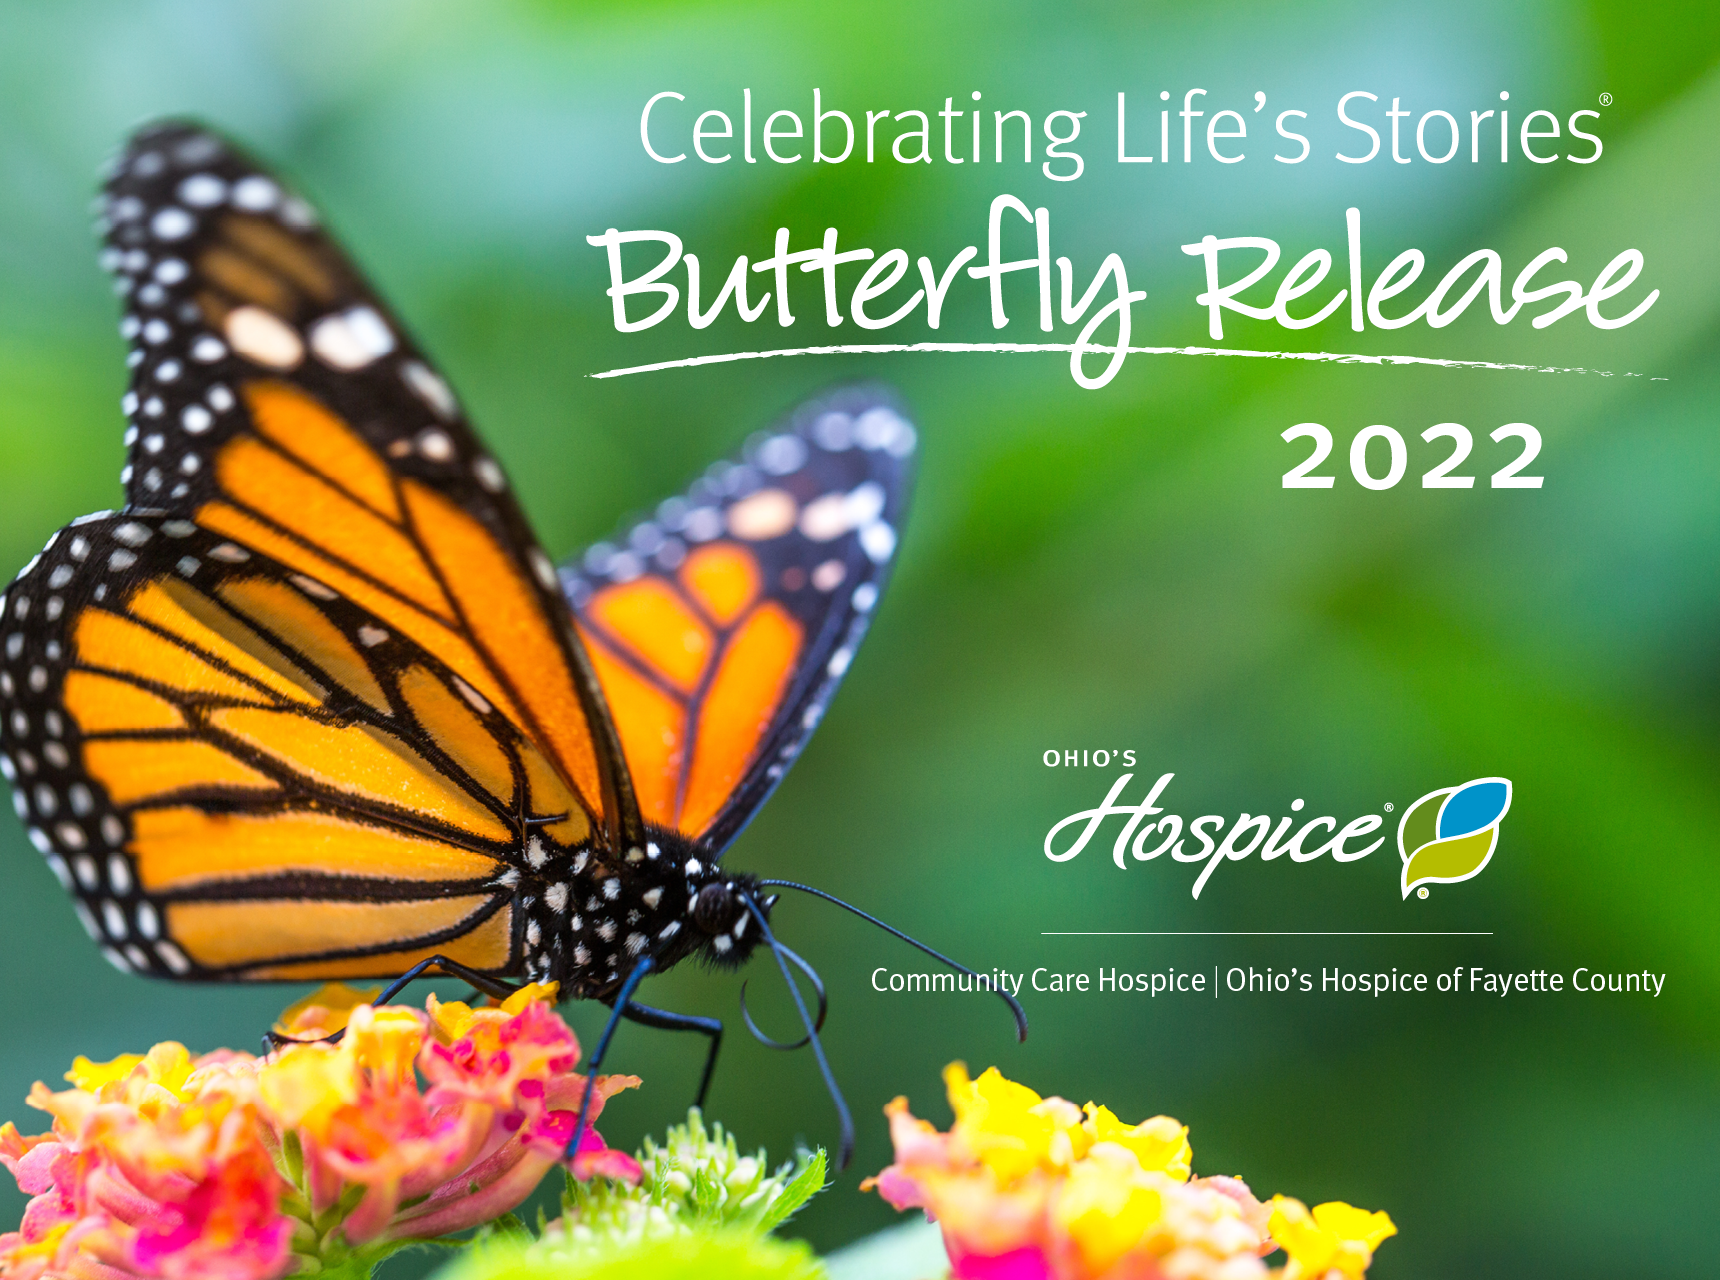 Community Care Hospice Ohio's Hospice of Fayette County Butterfly Release